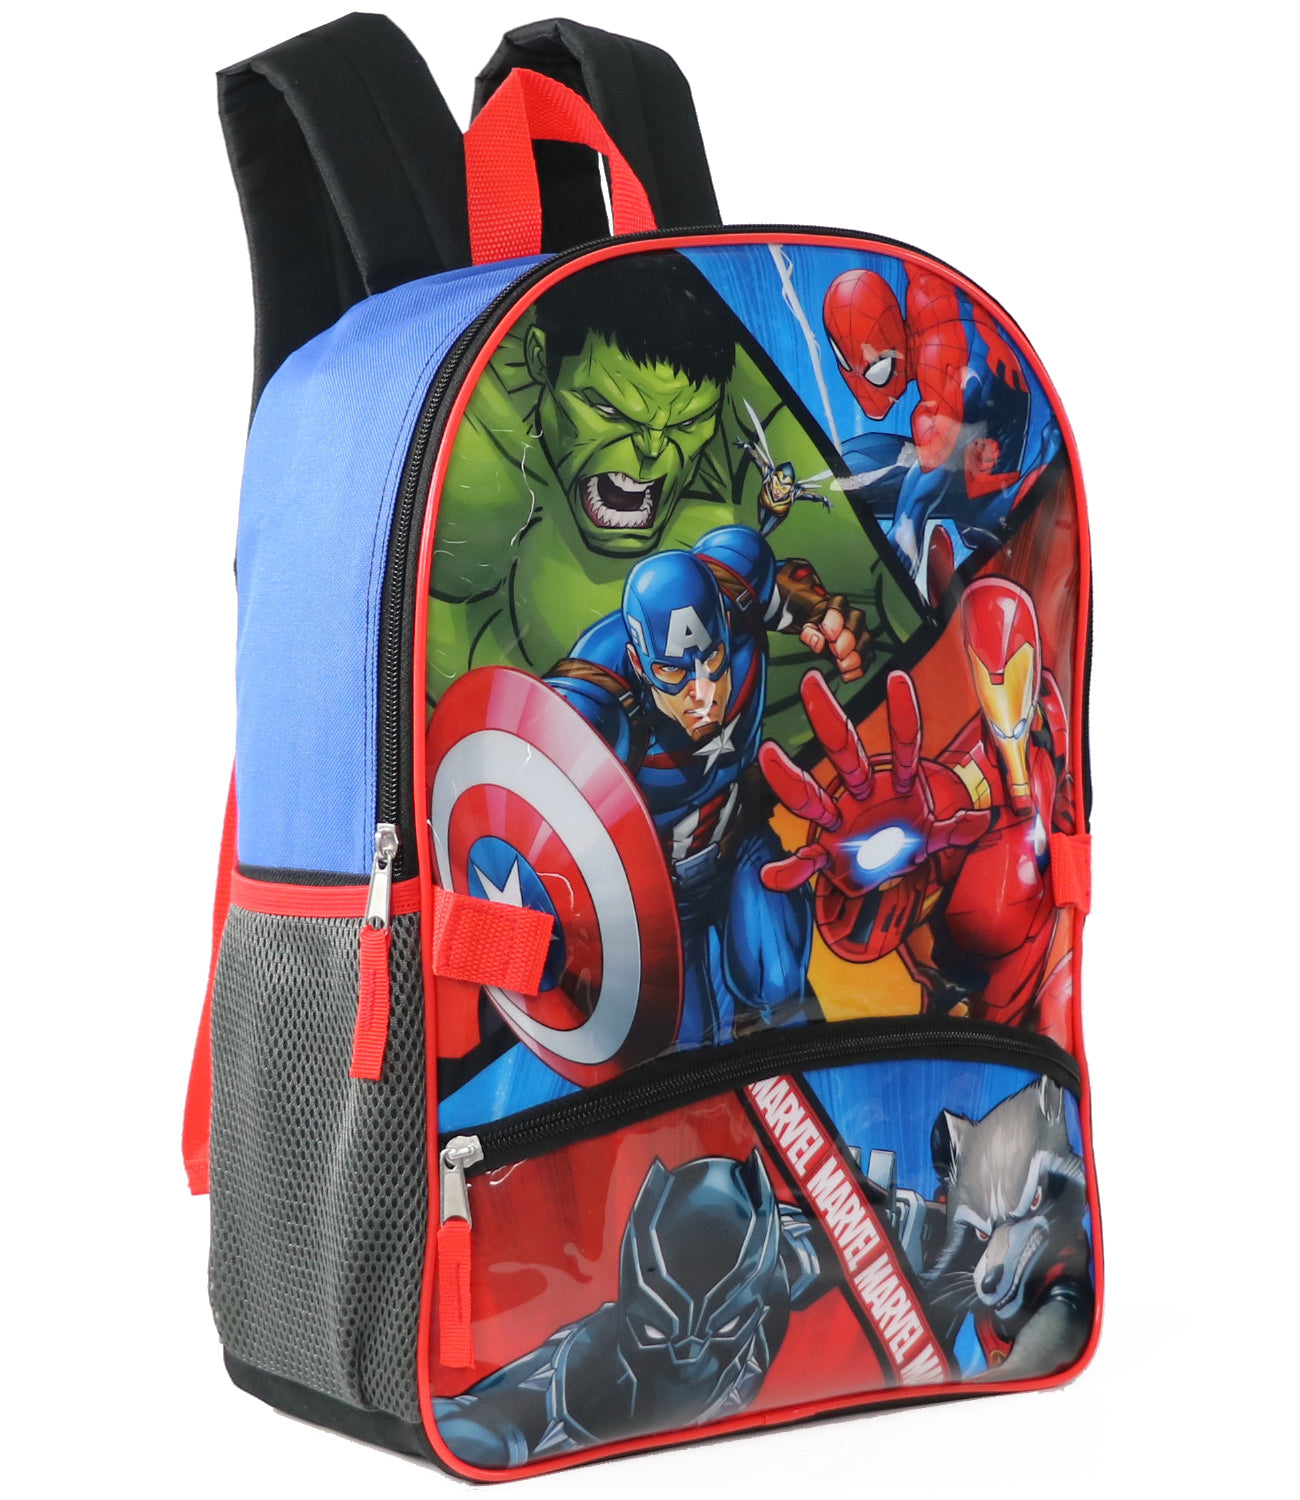 Marvel Heroes Backpack with Lunchbox